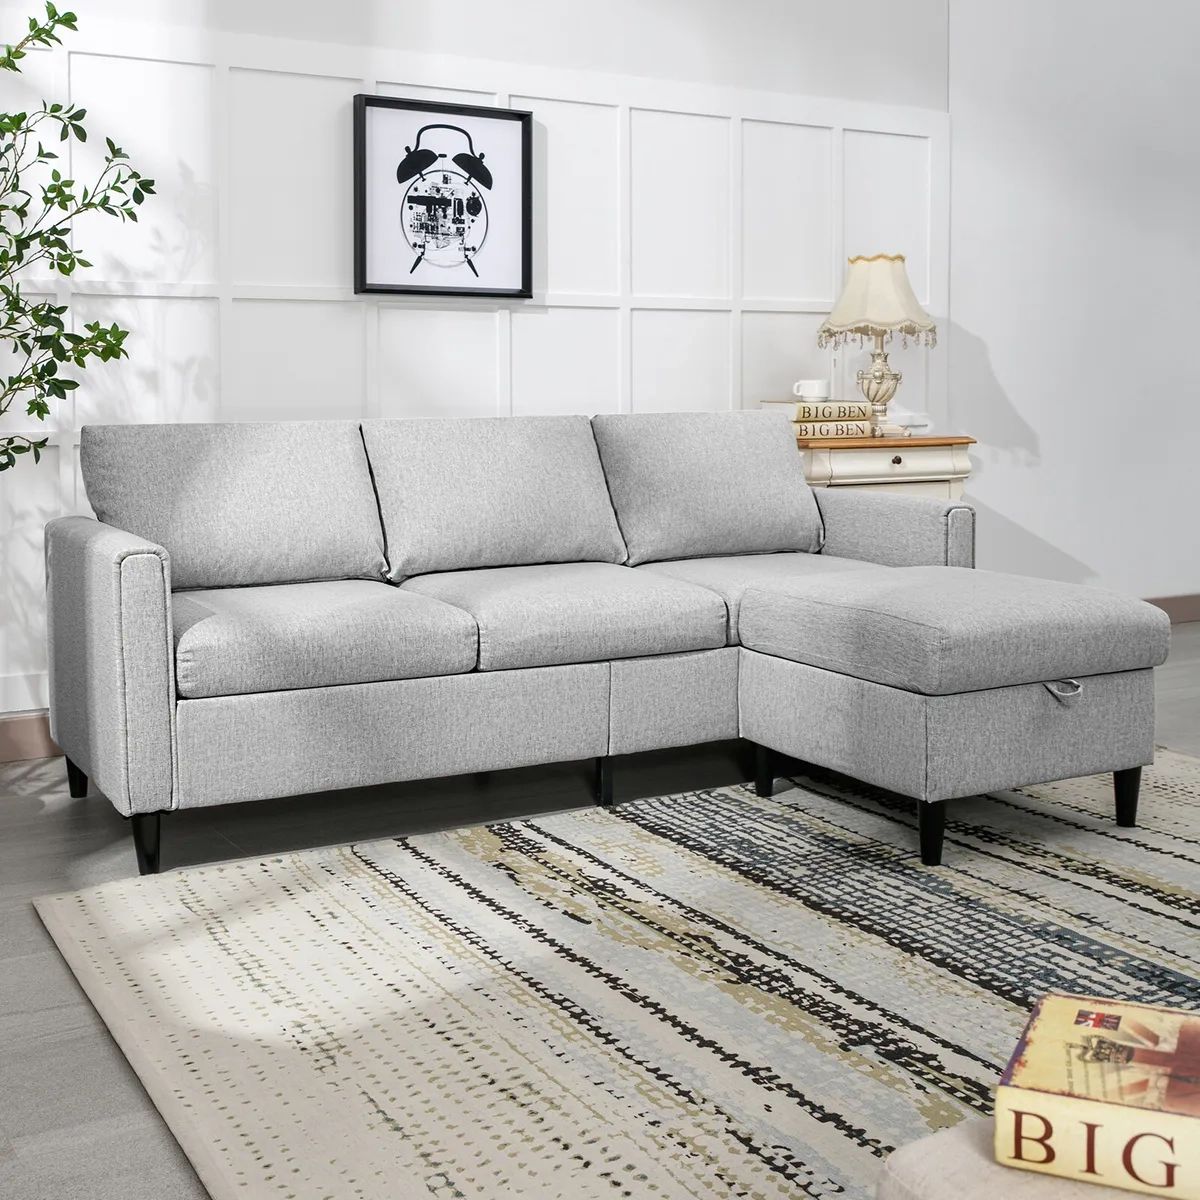 Small Convertible Sectional Sofa Couch, 77"l Shape Sofa With Storage  Ottoman | Ebay Inside Convertible L Shaped Sectional Sofas (View 5 of 15)